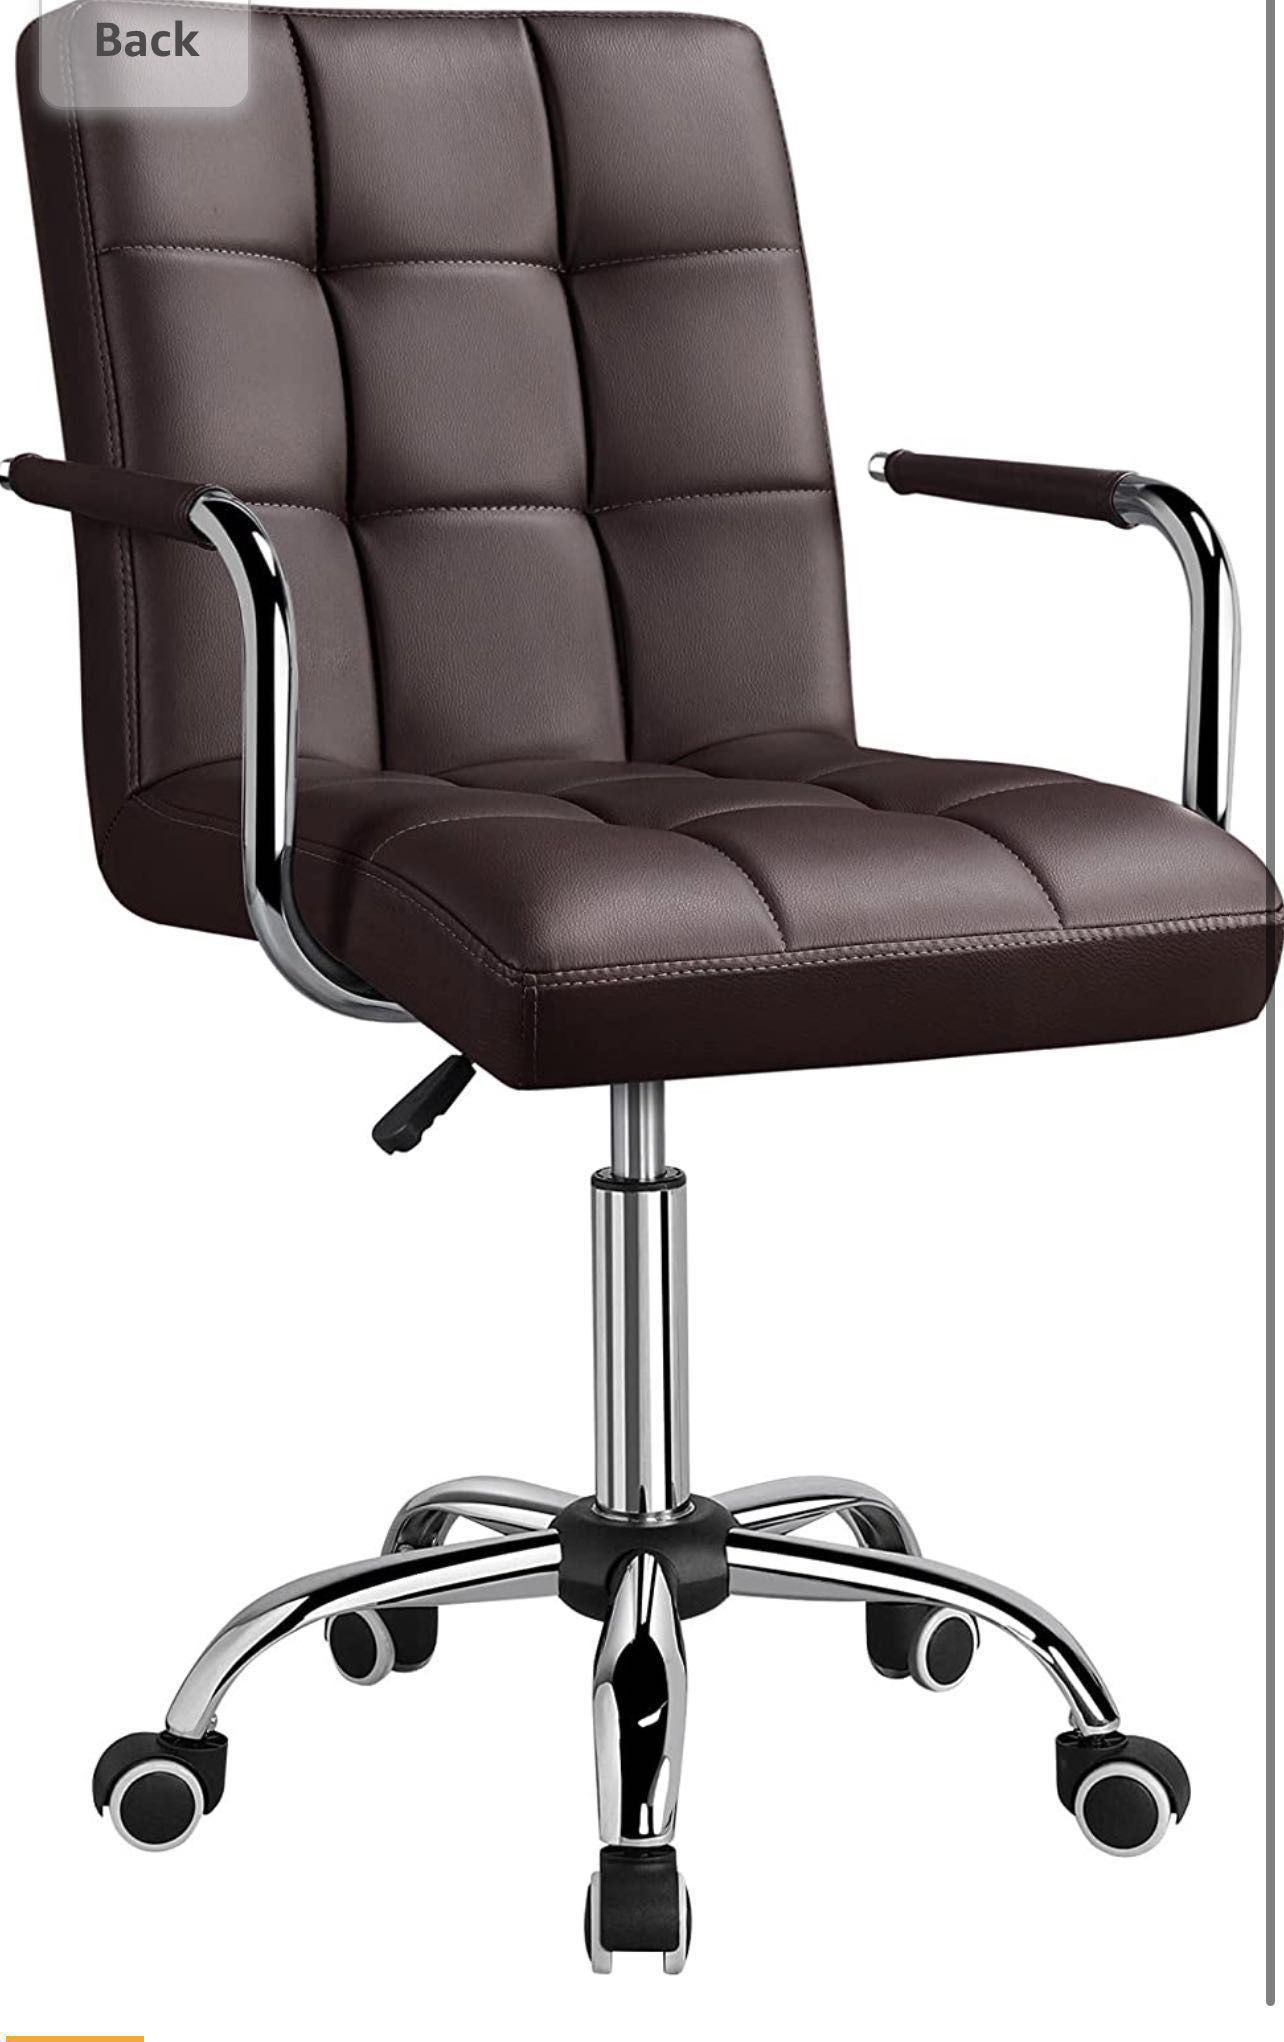 Office Desk Chair PU Leather Mid-Back Task Chair Executive Chair Modern Adjustable Home Office Chair Swivel Chair with Smooth Casters Brown 591932